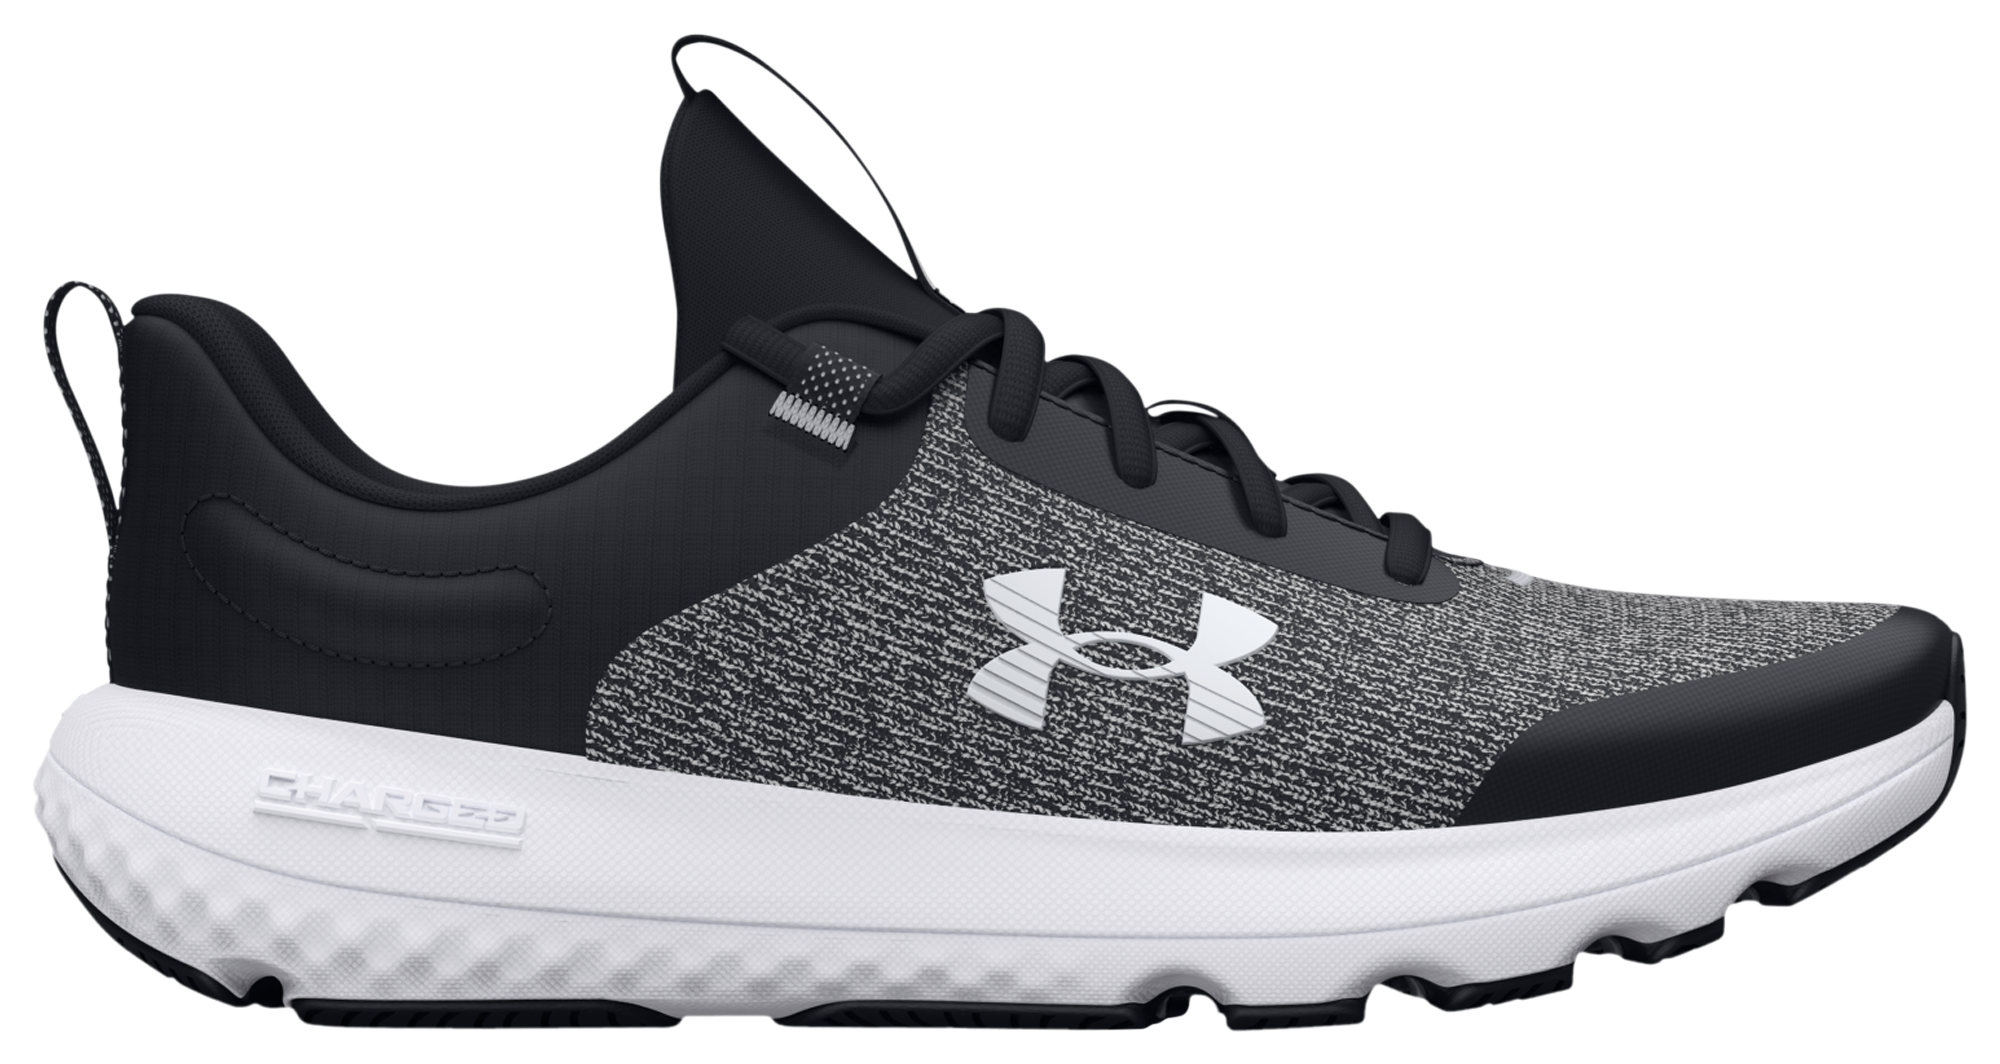 Under Armour Charged Revitalize